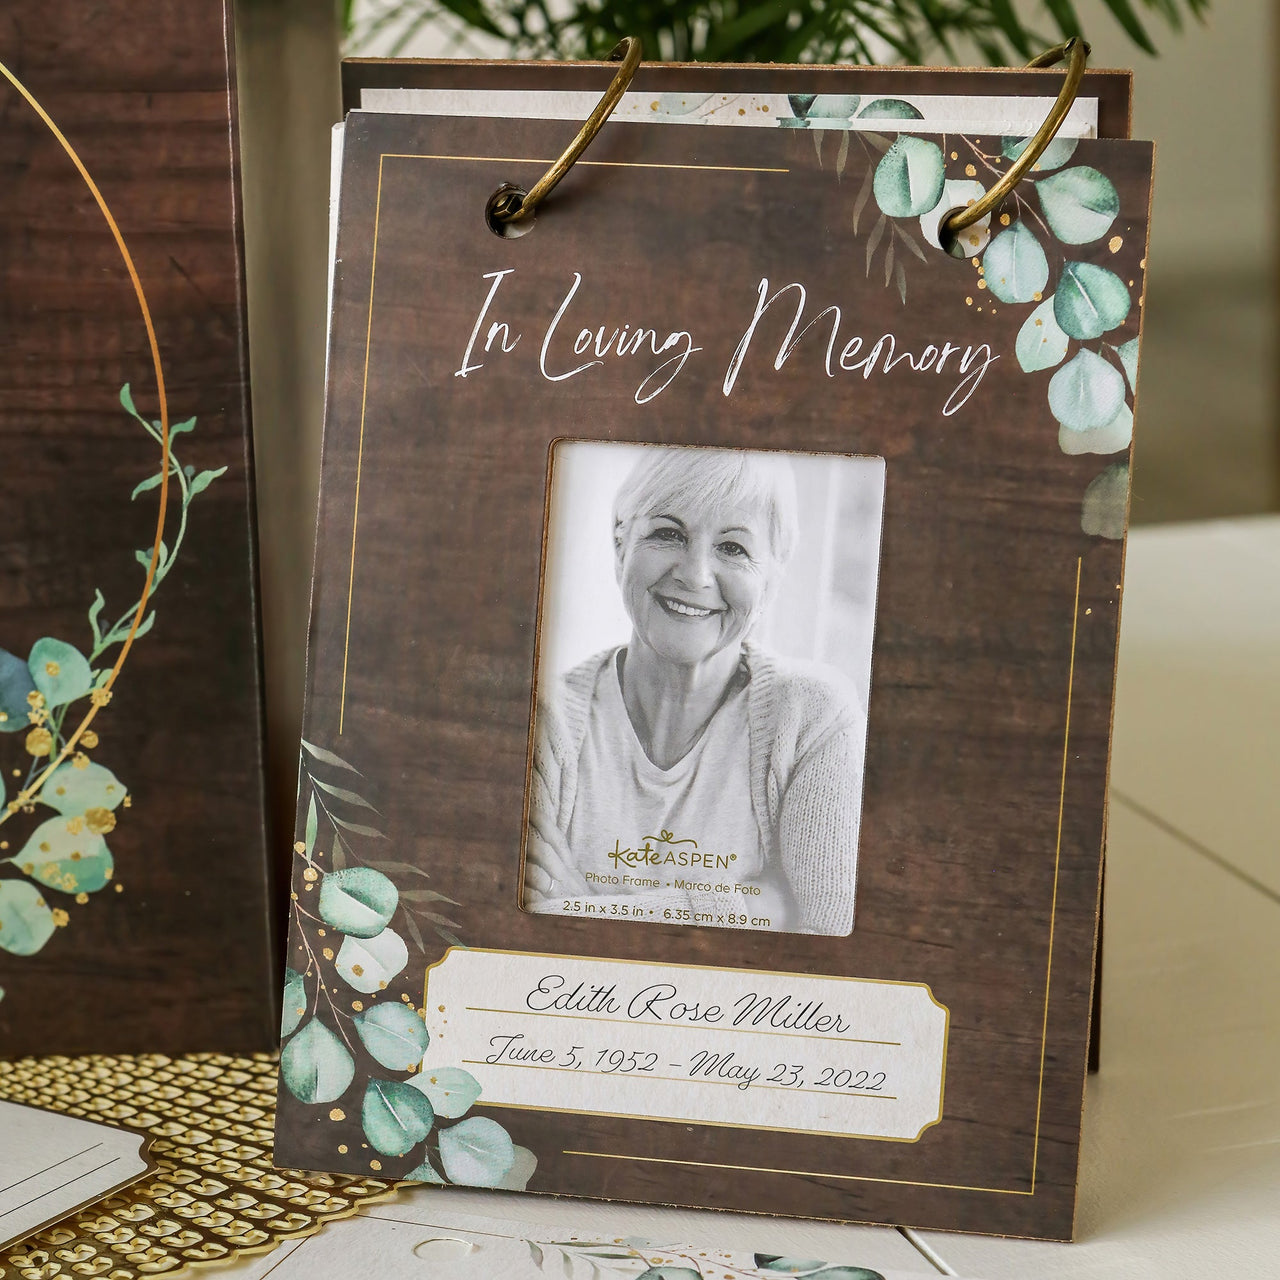 Celebration of Life Memory Funeral Guest Book and Box for Memorial Service  2 My Wedding Favors 